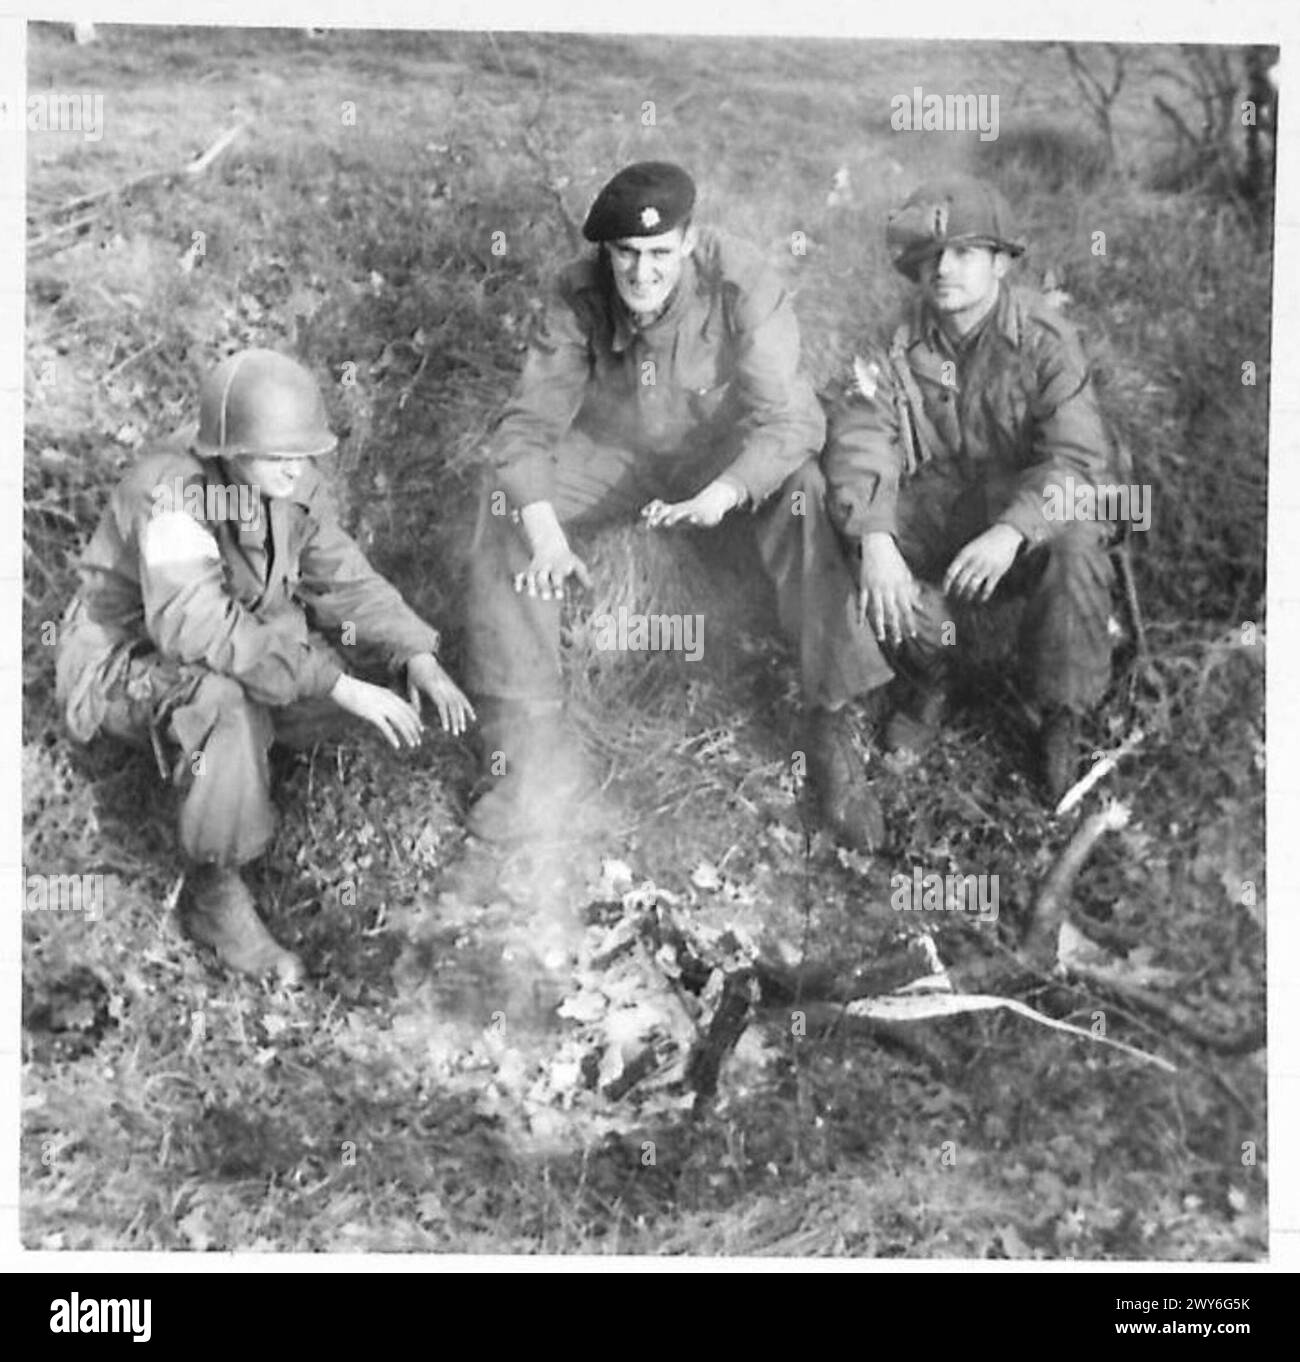 11TH ARMOURED DIVISION SPEARHEAD - A British guardsman shares a fire with American Paratroopers Left to right - 1st Class Rudy Paratroopers [of Newark New Jersey] 17th U.S.Airborne Division Gdsm. W.Angus of Aberdeen, Scots Guards, and Sgt.Harry Staughton of Richmond, Virginia - 17th U.S. Airborne Division. , British Army, 21st Army Group Stock Photo